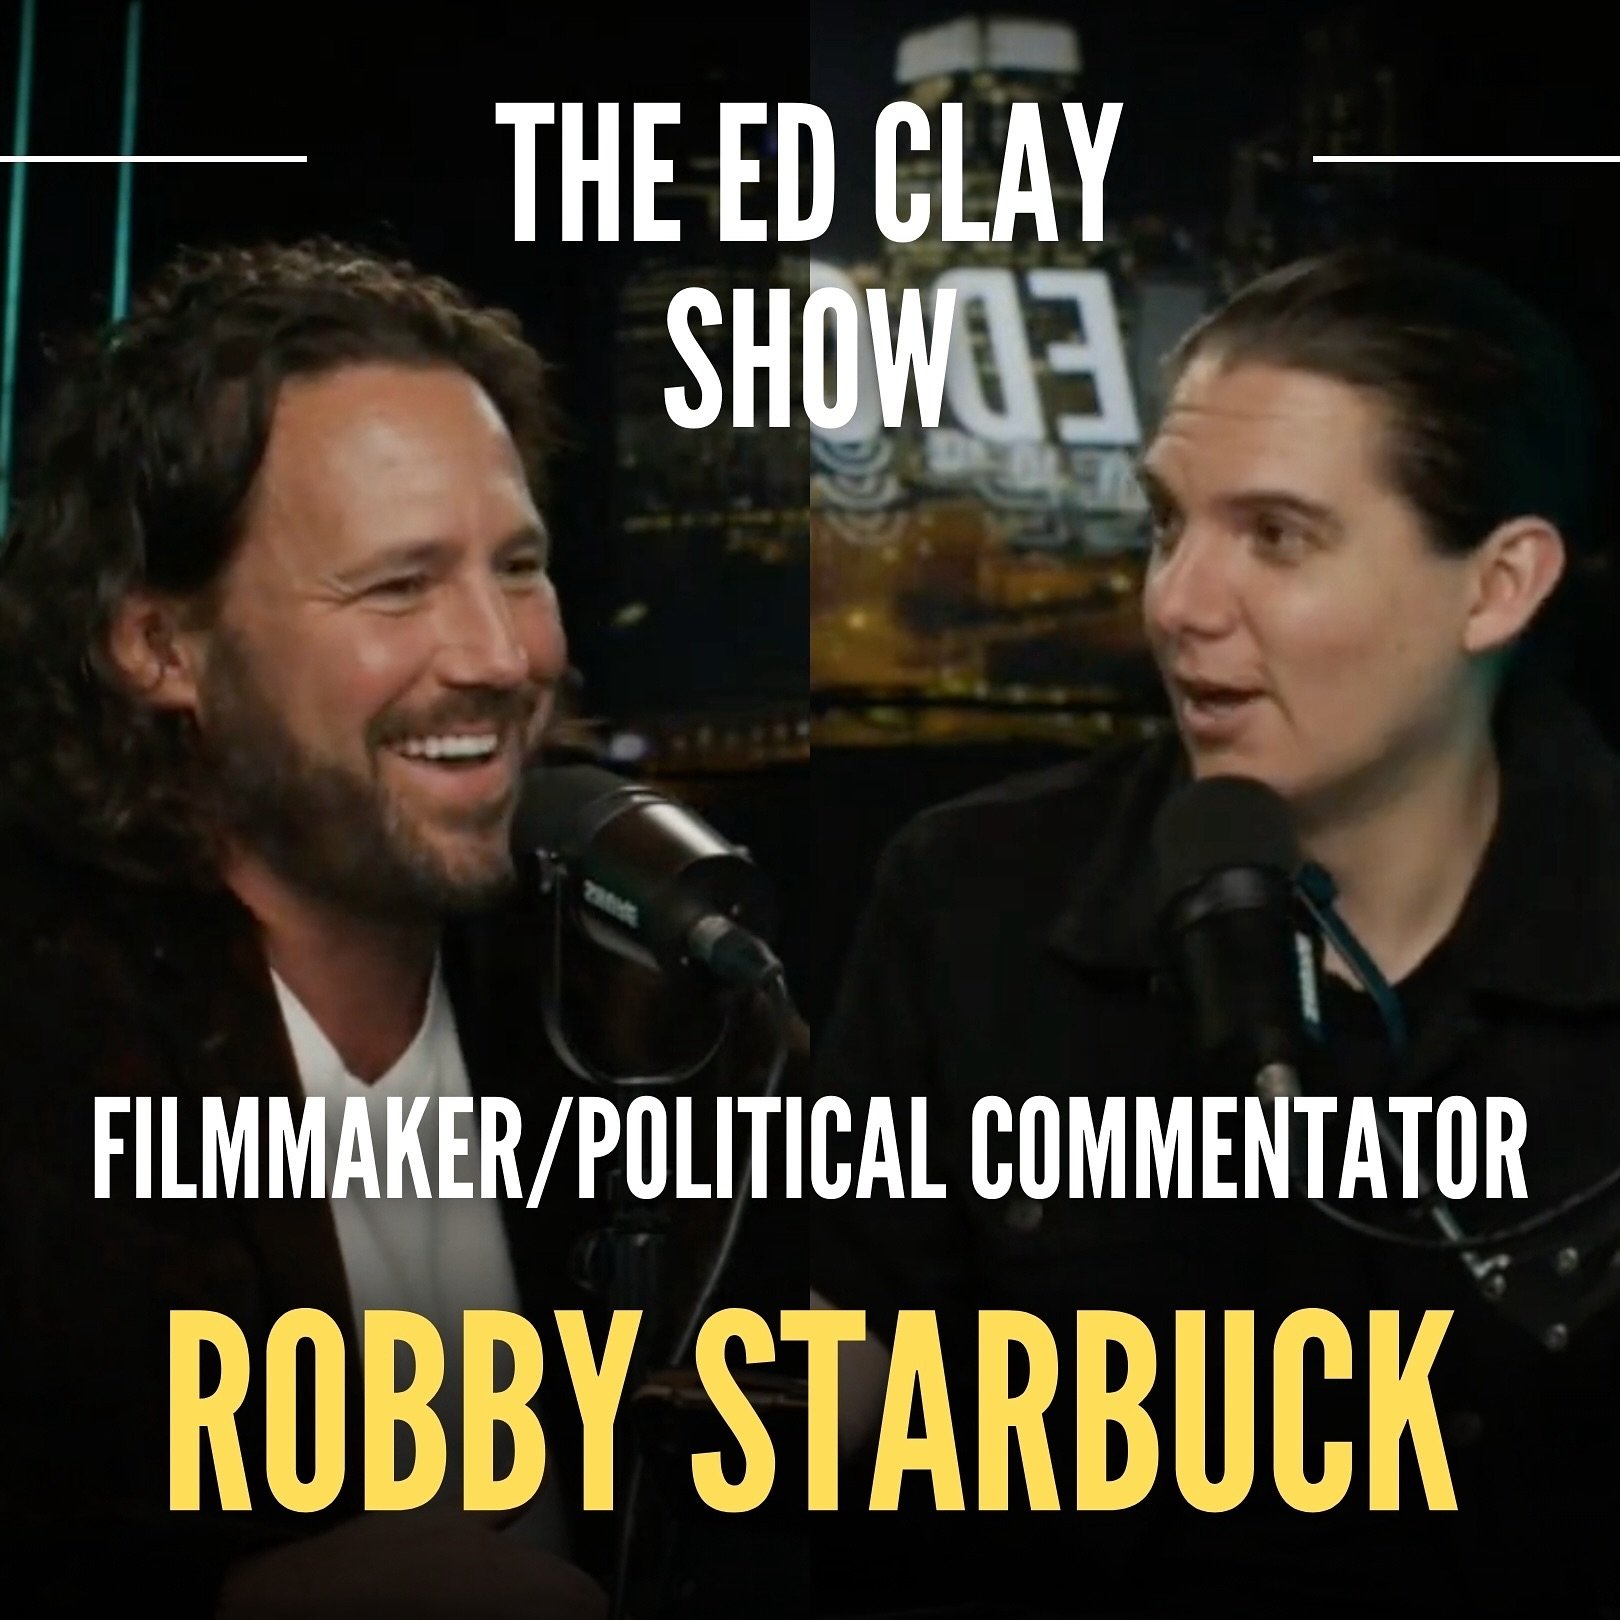 On this episode of The @edclayshow @edclayofficial sits down with @robbystarbuck , a former US congressional candidate and filmmaker who recently released his virally acclaimed &ldquo;The War on Children&rdquo; which exposed the dangers of gender ide